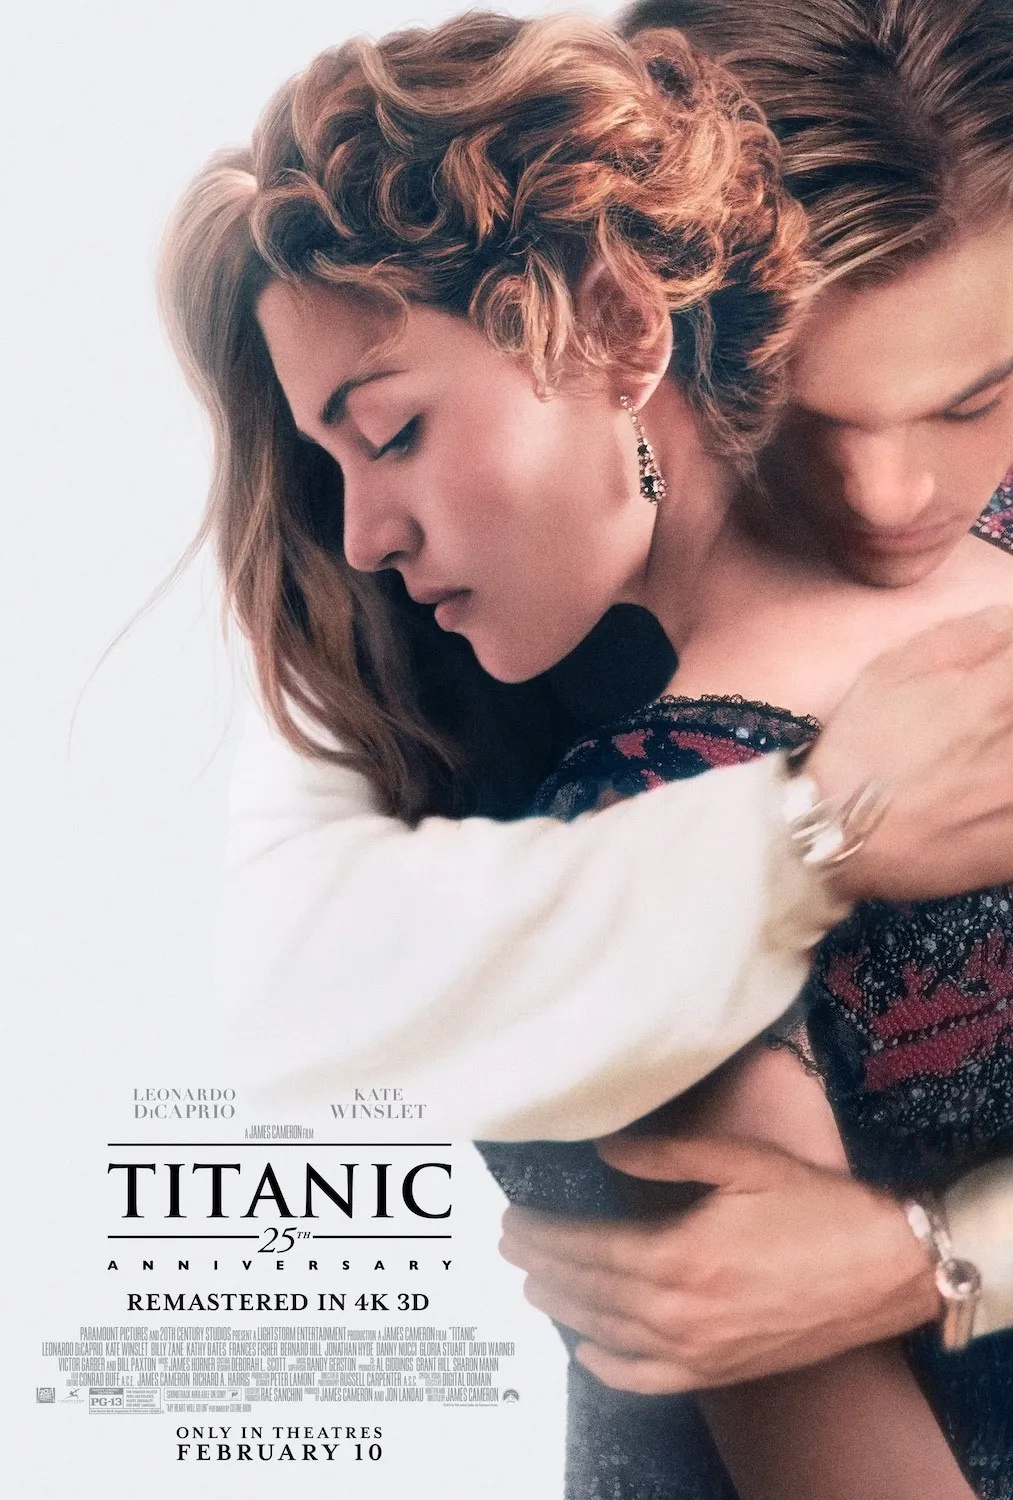 Titanic Getting 25th Anniversary Theatrical Re-Release 